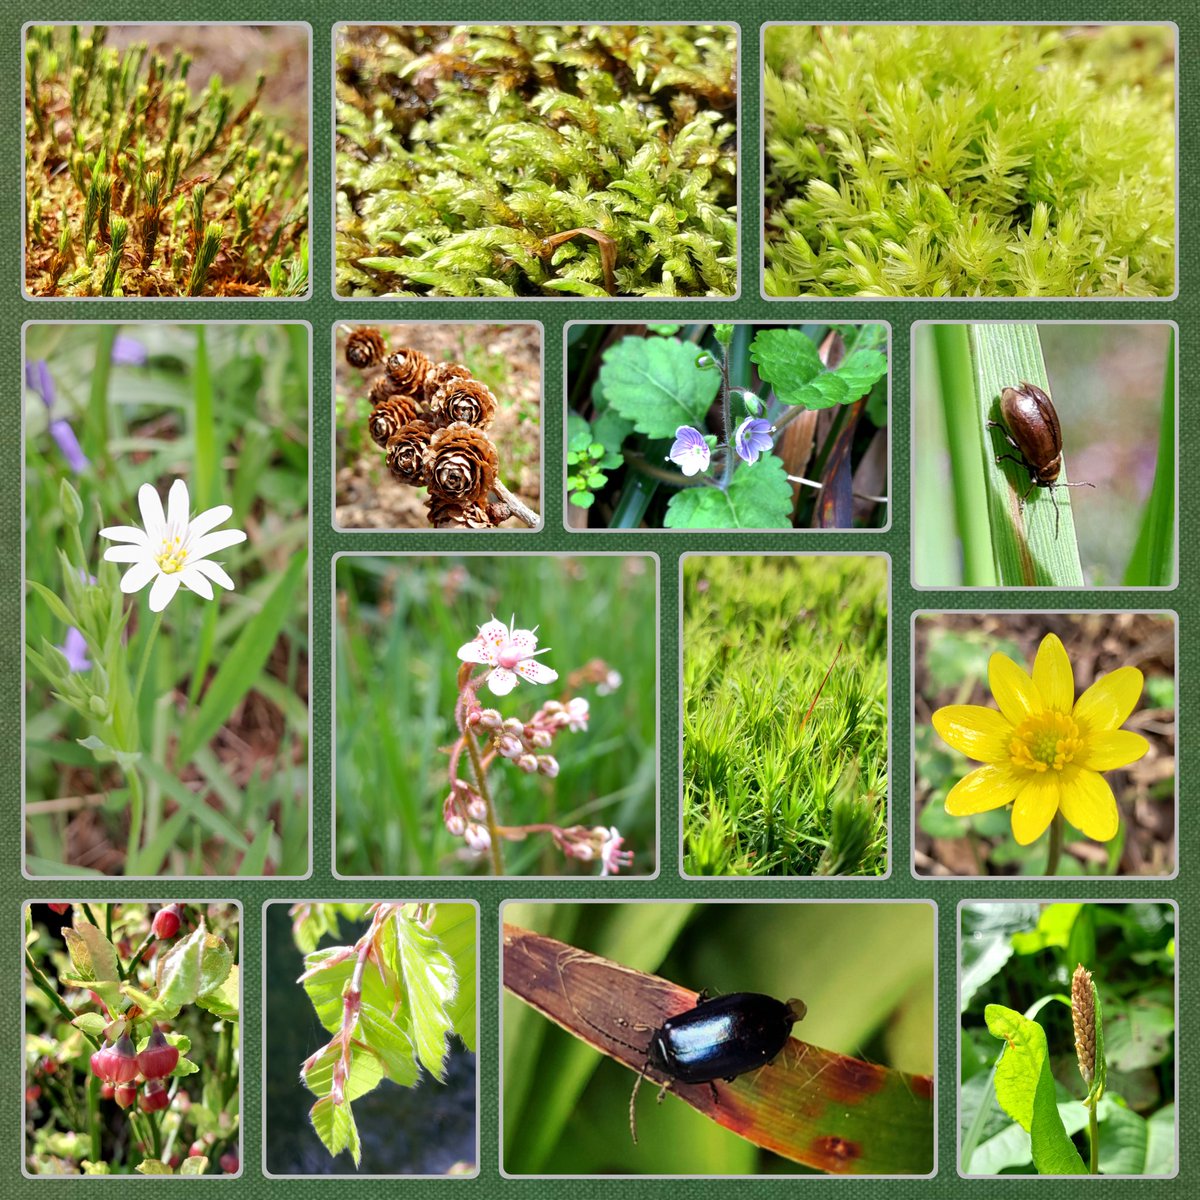 Mosses, flowers, beetles and beautiful nature - our latest walk in West Yorkshire

#Mosses #Flowers #Beetles #Nature #Wildflowers #NaturePhotography #ThePhotoHour @Britnatureguide #TwitterNatureCommunity #TwitterNaturePhotography @365DaysWild #OurBeautifulWorld #Outdoors